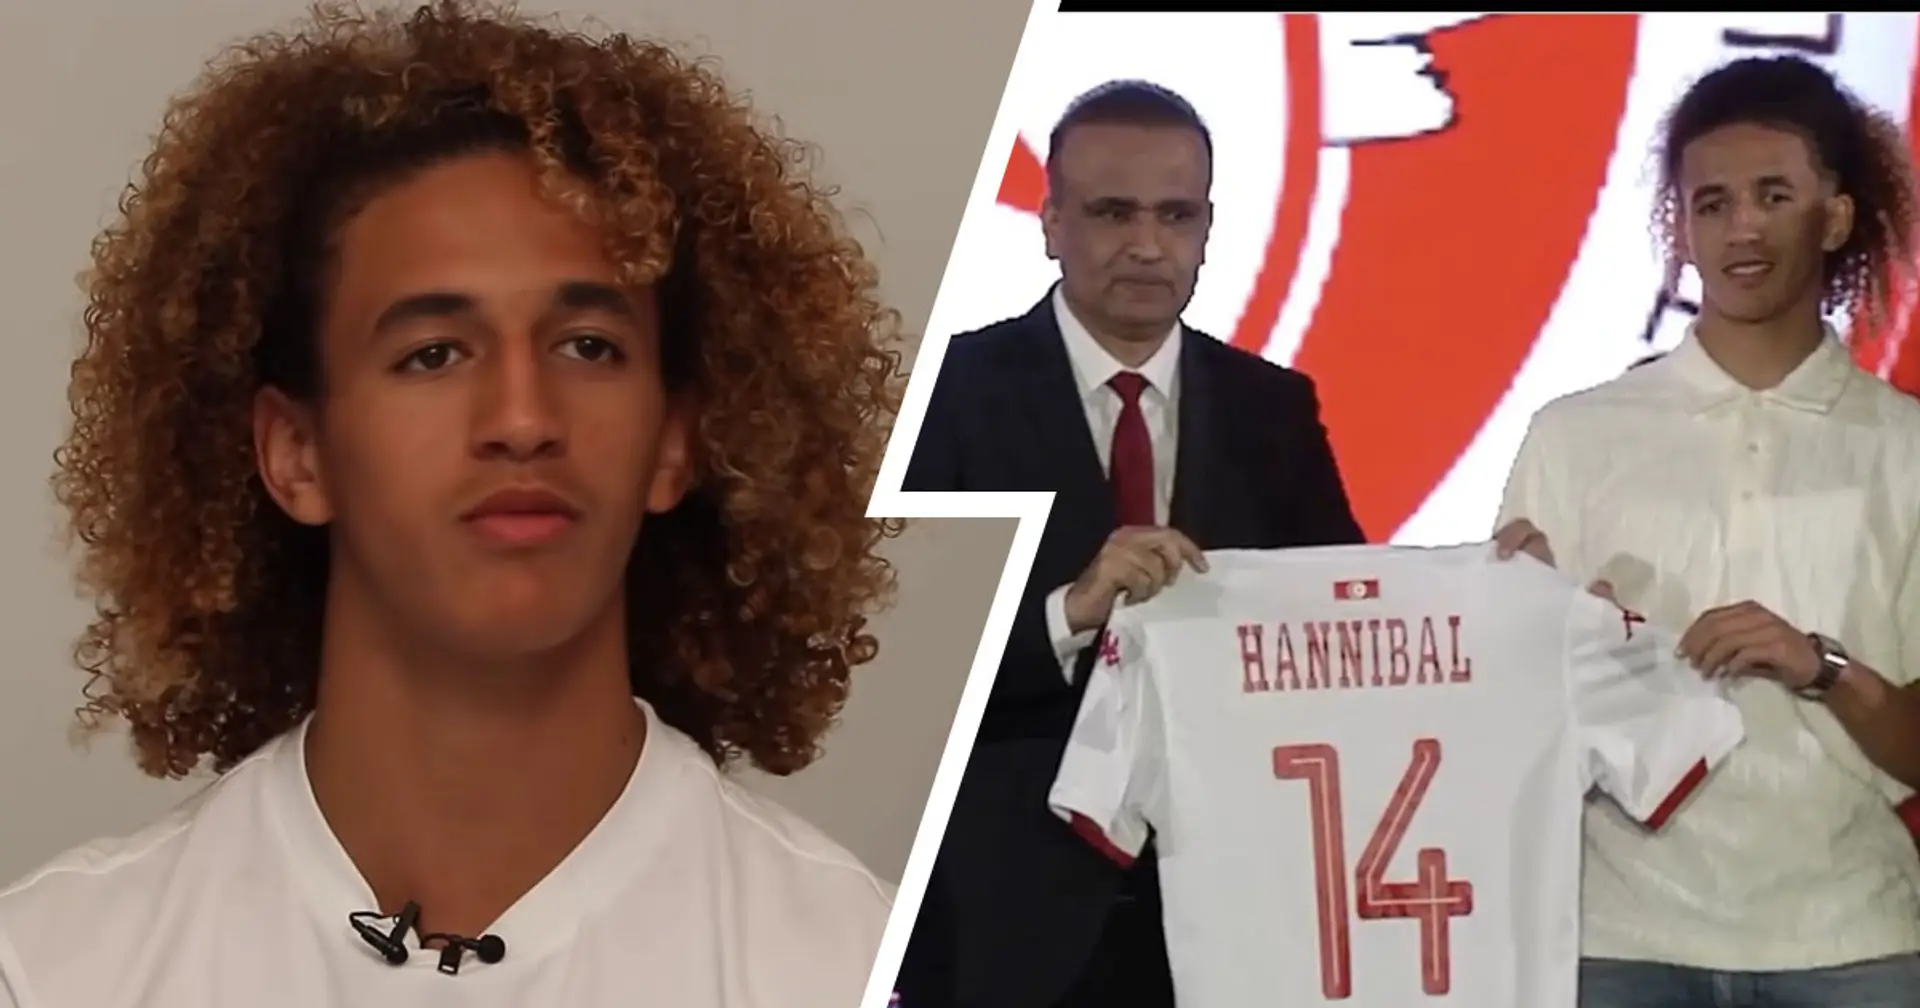 'It's the best decision': Hannibal reveals reason behind choosing to represent Tunisia over France